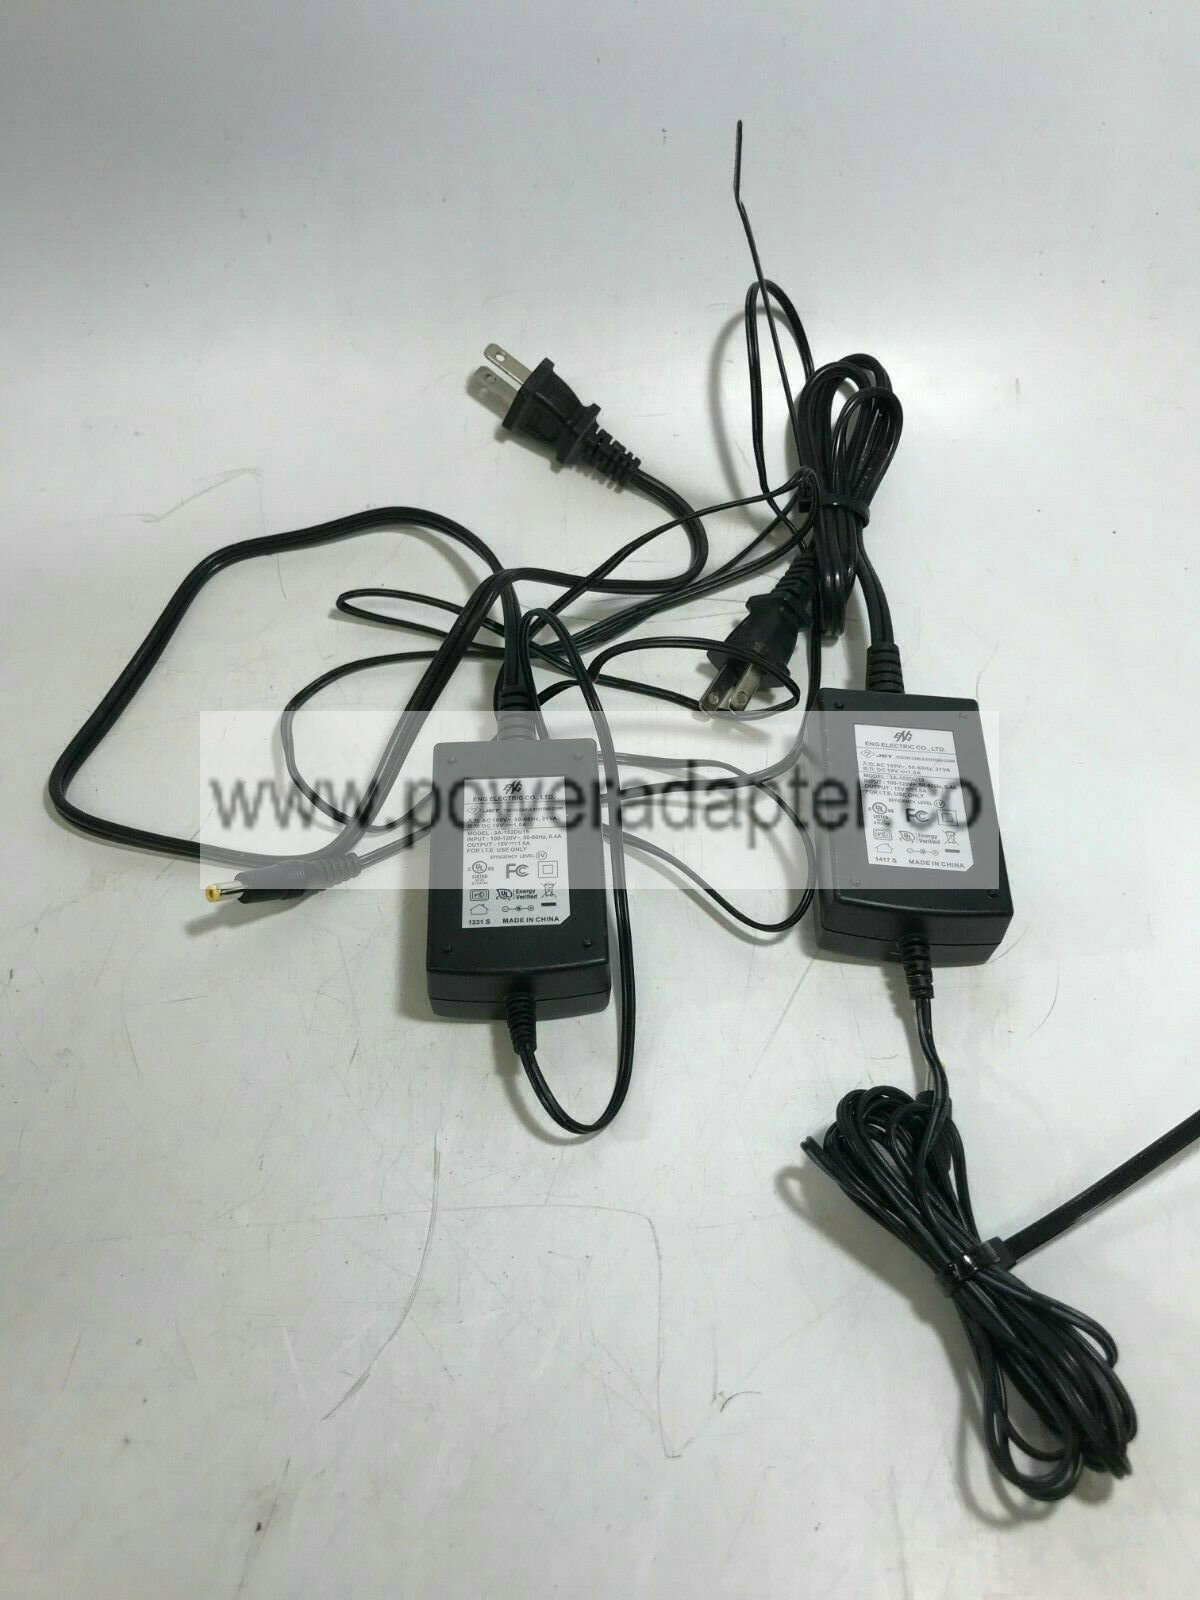 ENG AC Power Supply Adapter 3A-152DU15 100-120V 0.4A ~ 15V 1A - Lot of 2! Please note this listing is for two 3A-152DU1